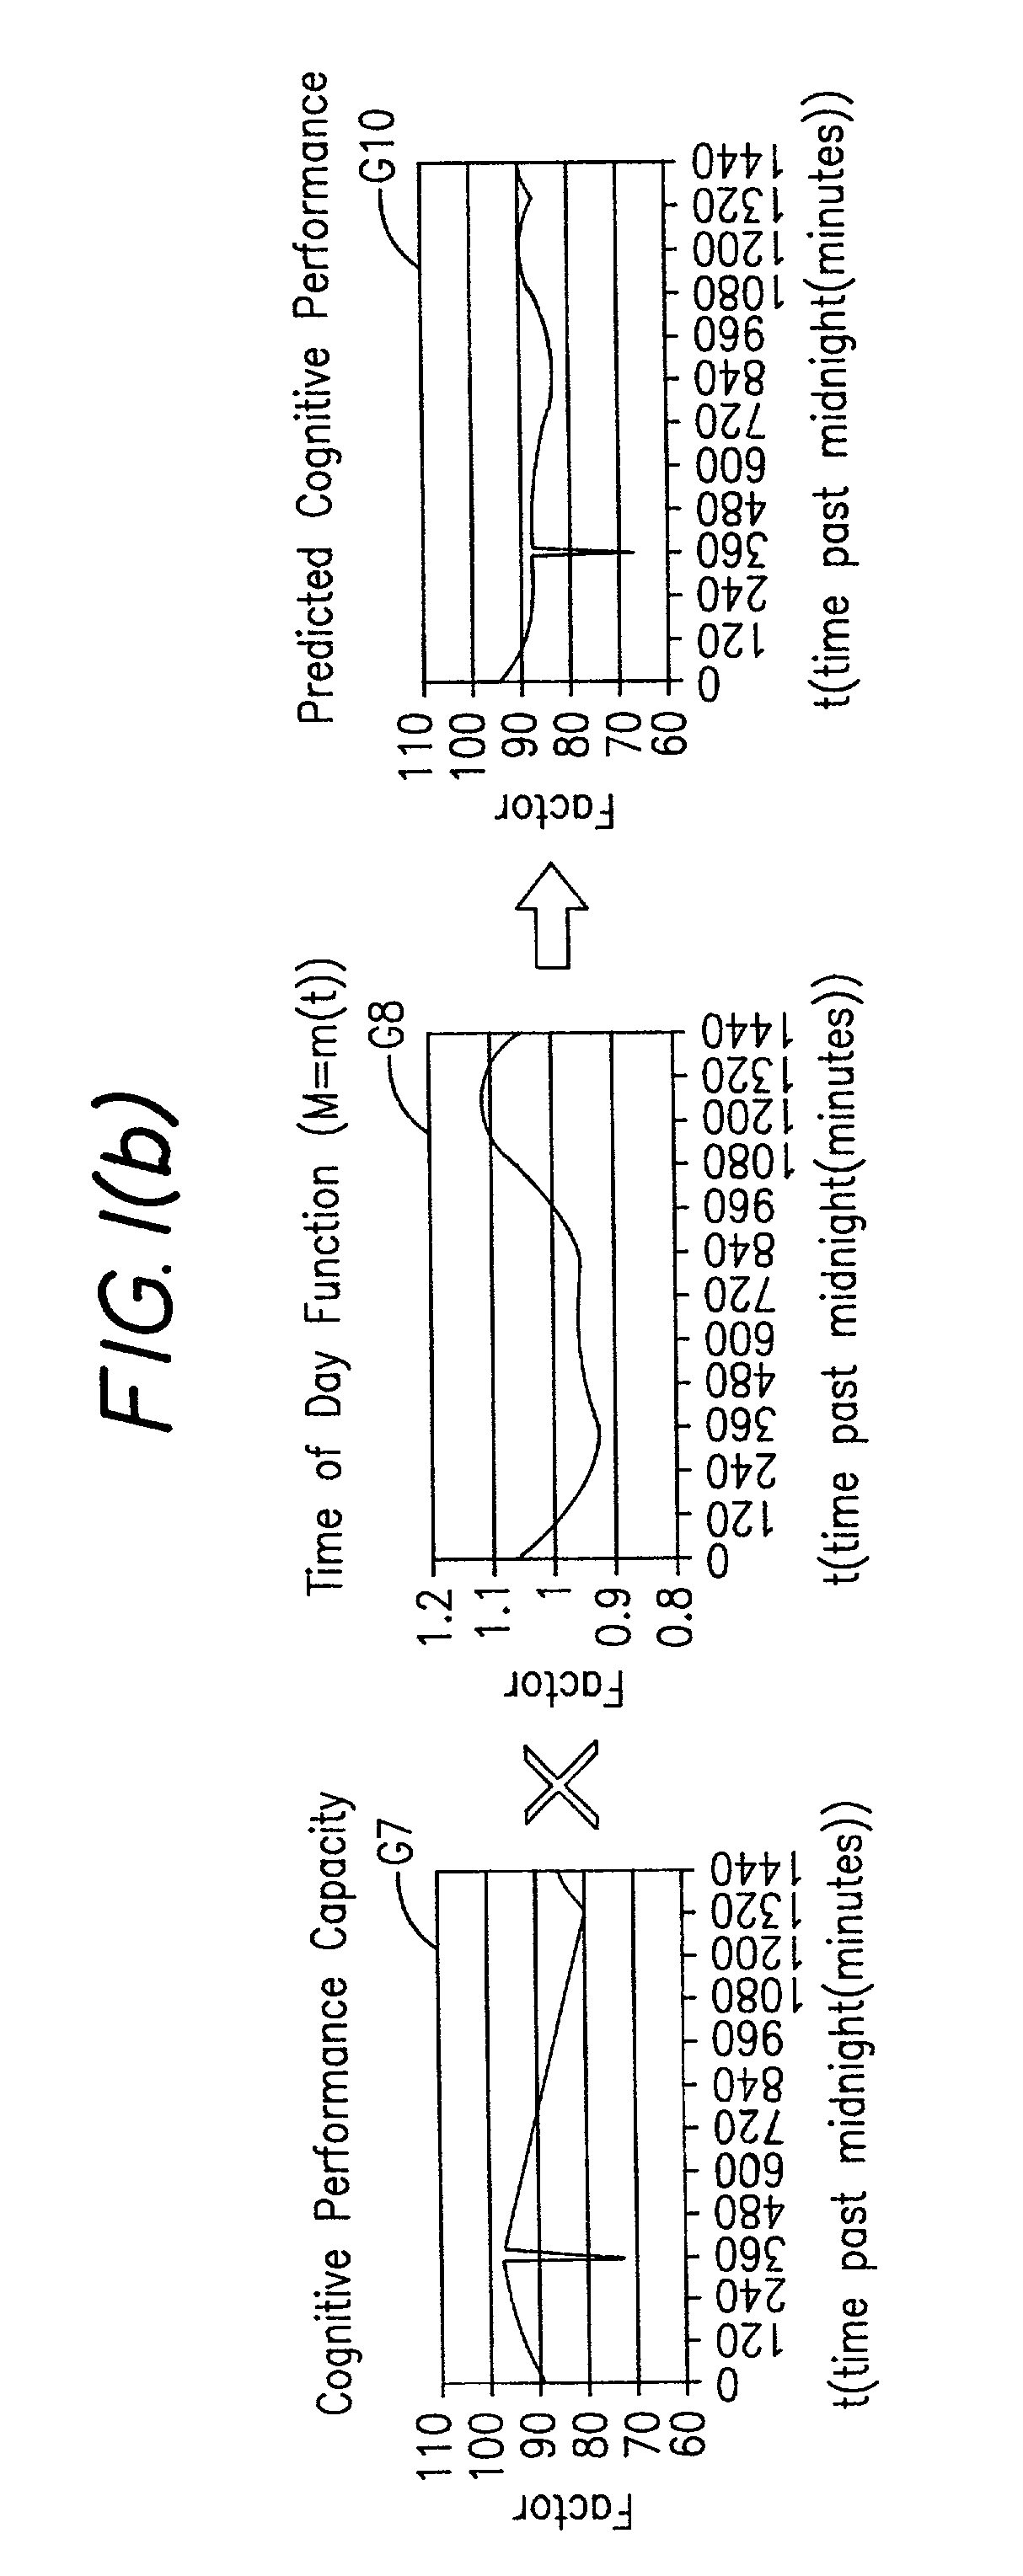 System and method for predicting human cognitive performance using data from an actigraph